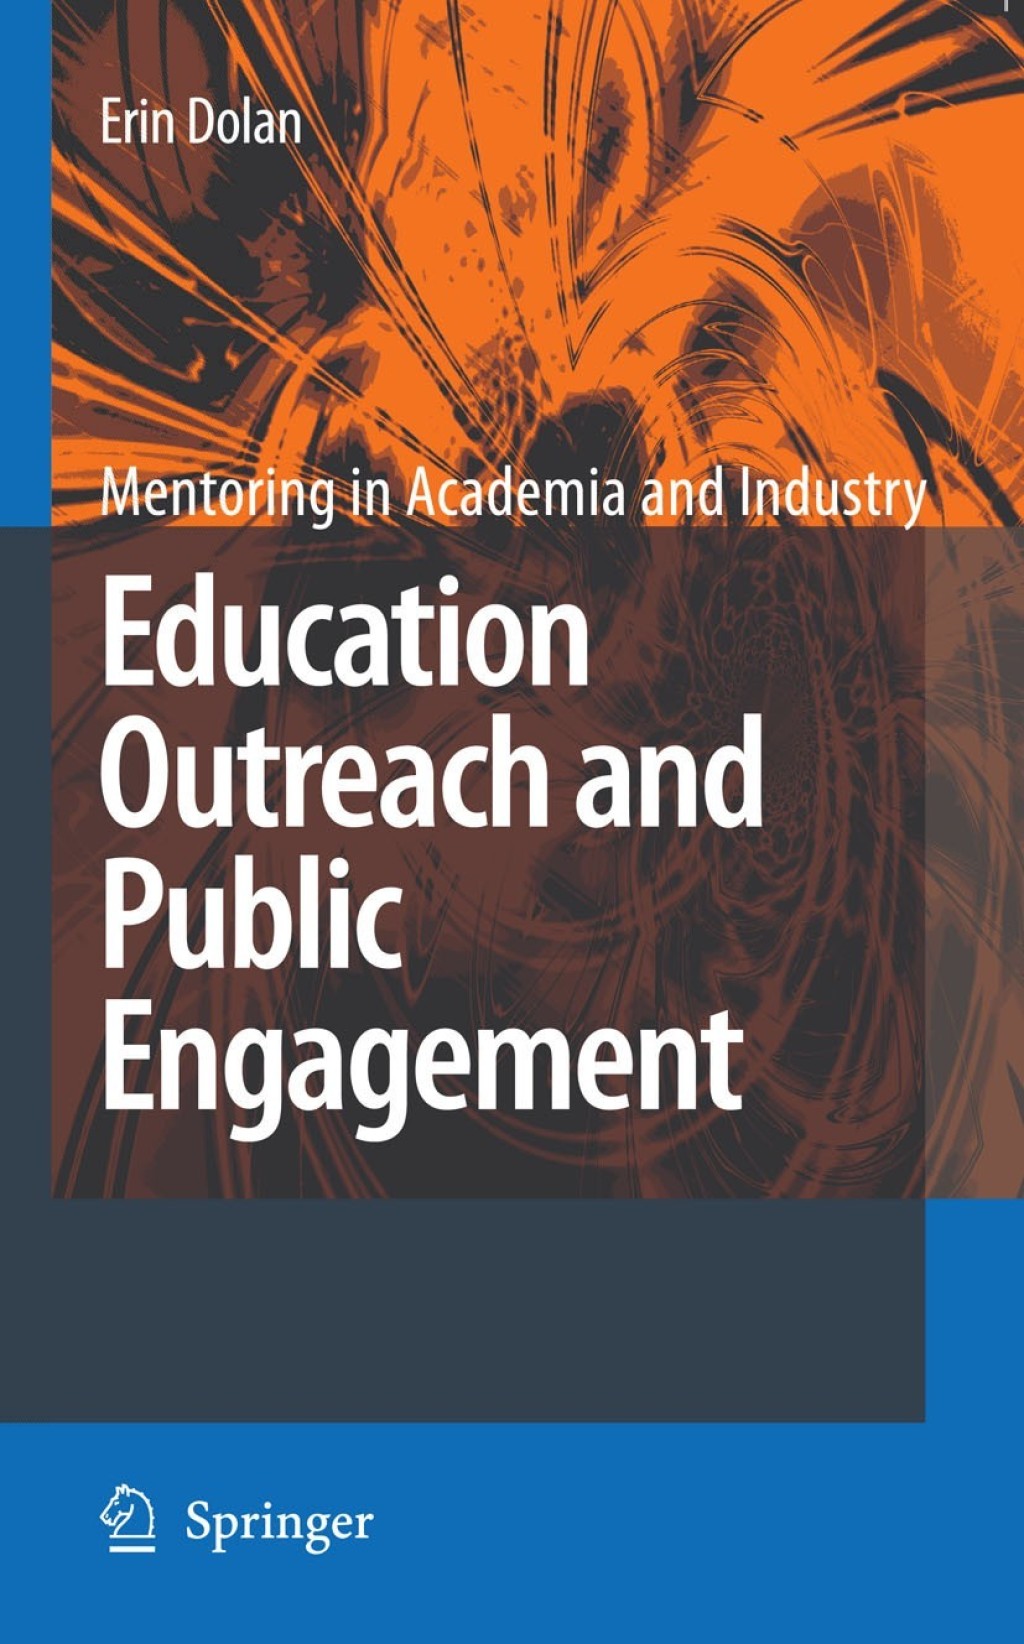 Education Outreach and Public Engagement (eBook Rental) - Erin Dolan,